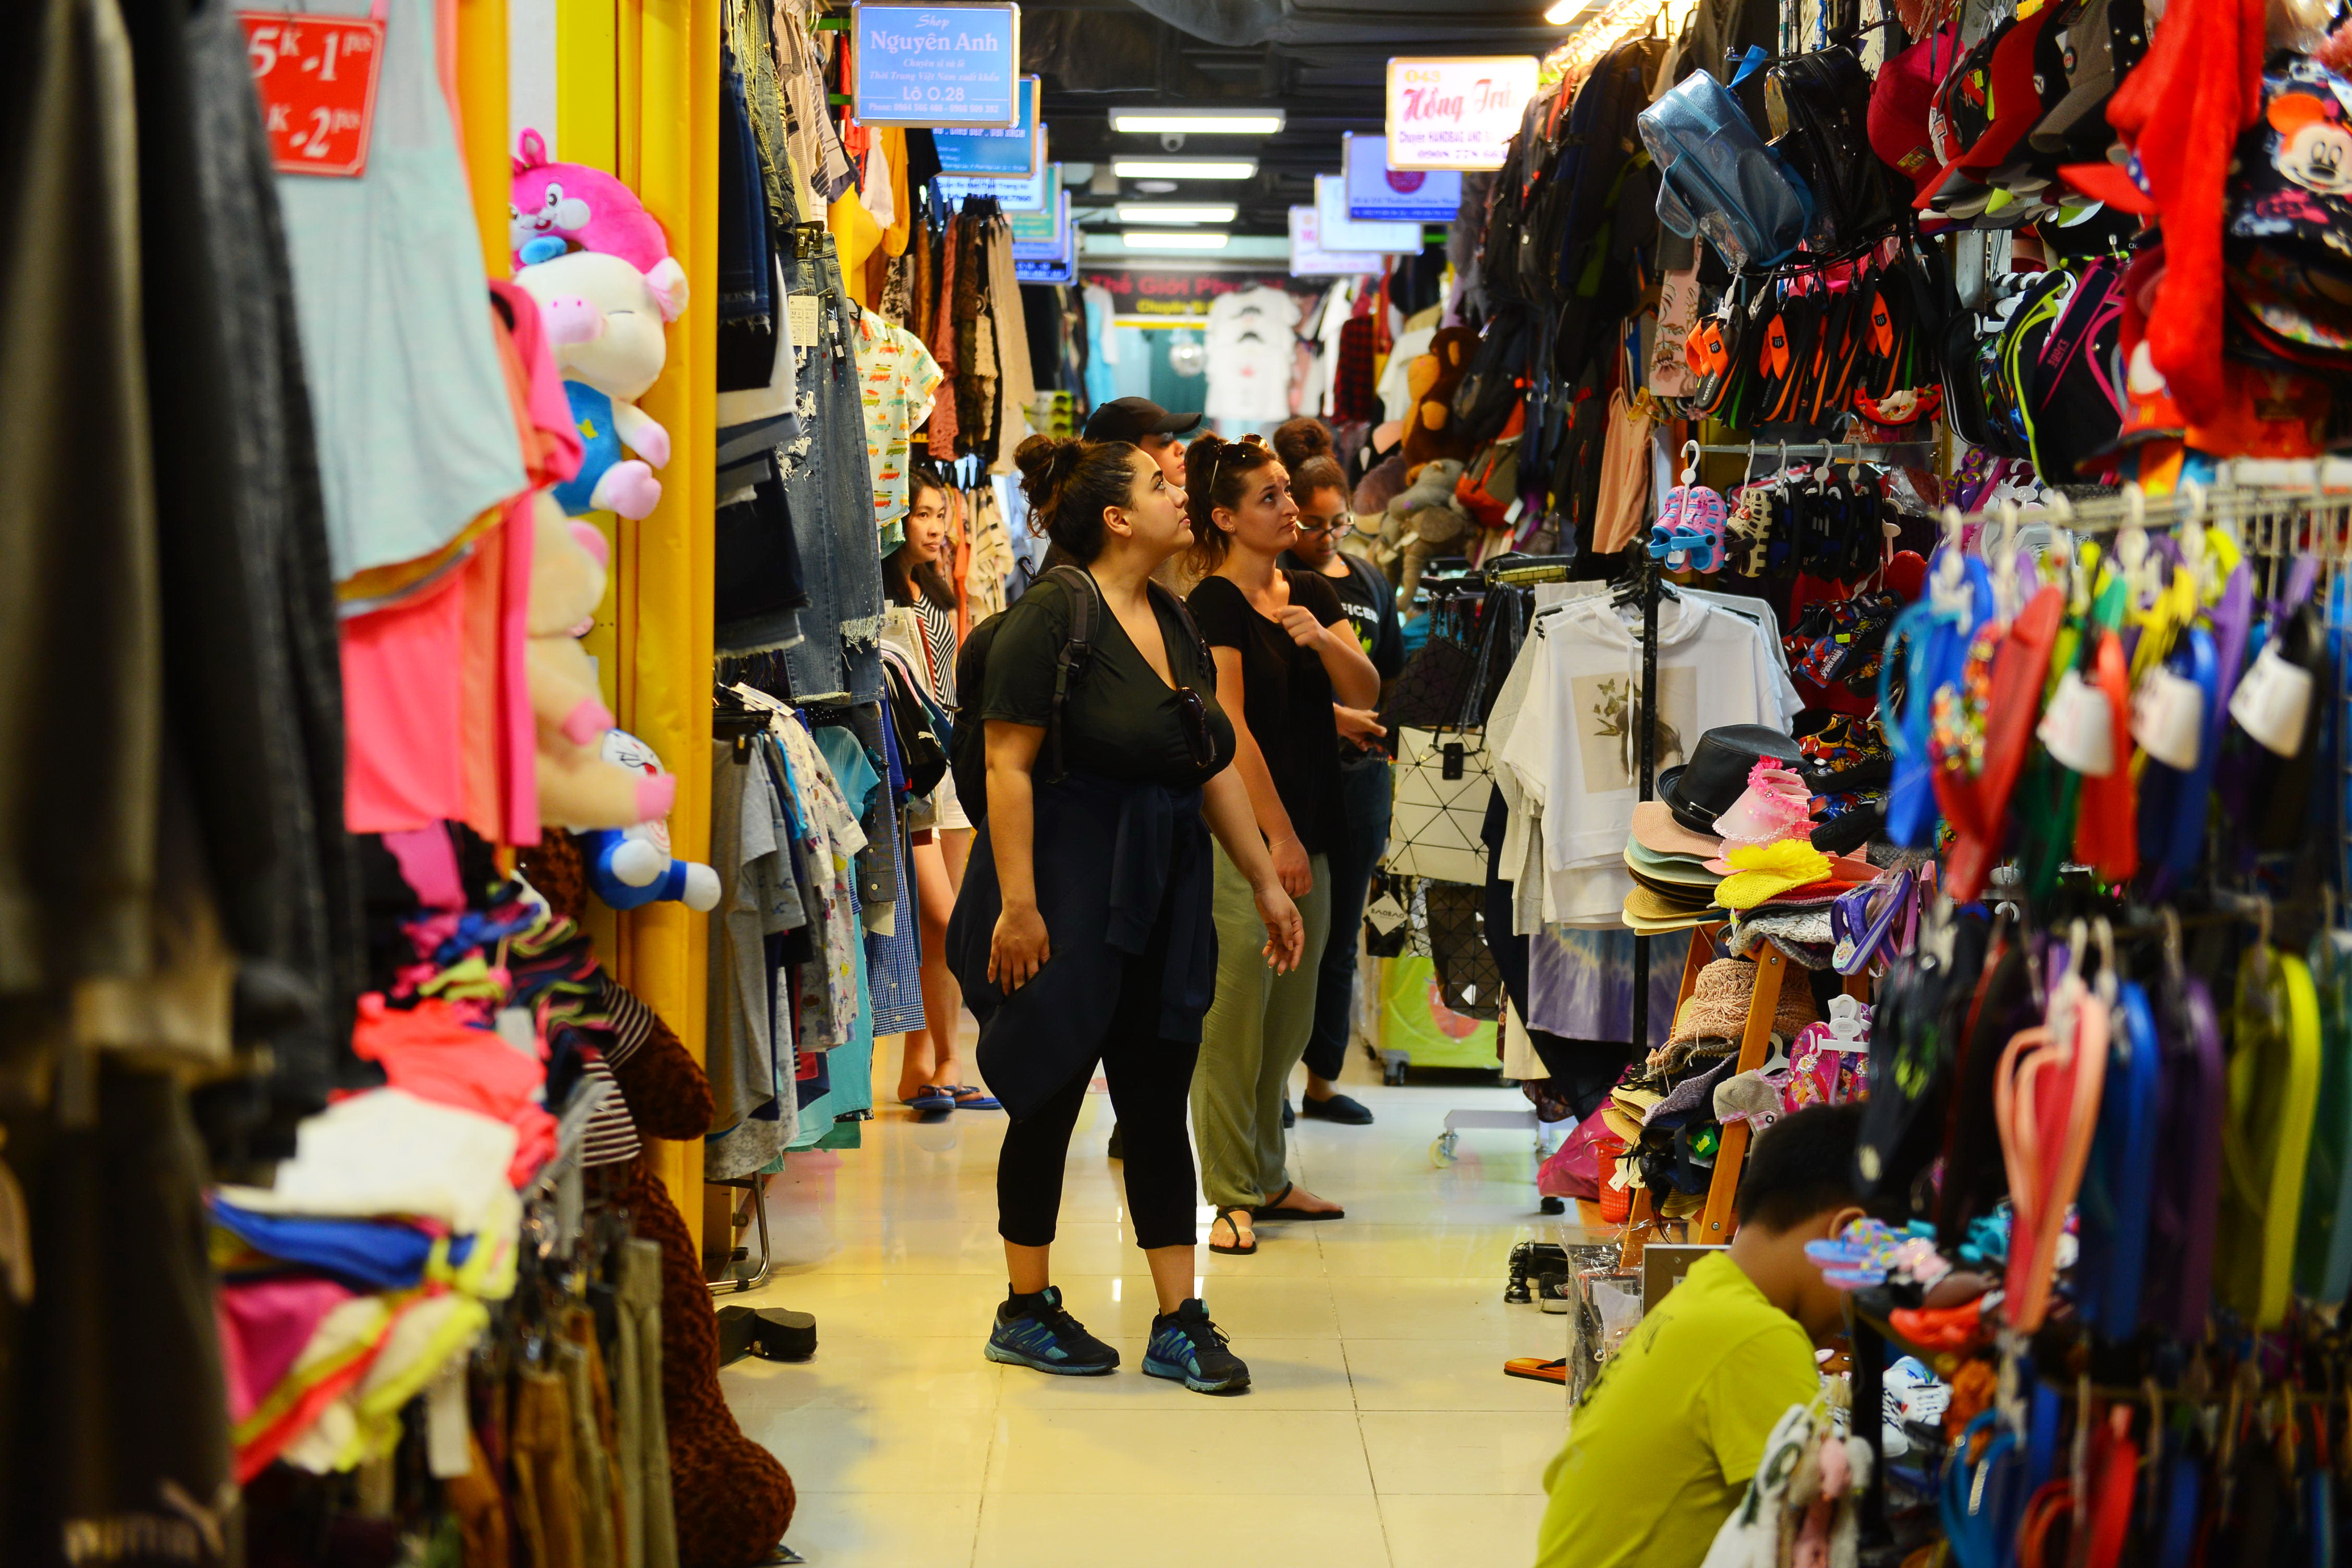 Foreign tourists browse for clothes at the Sense Market Shopping Center.